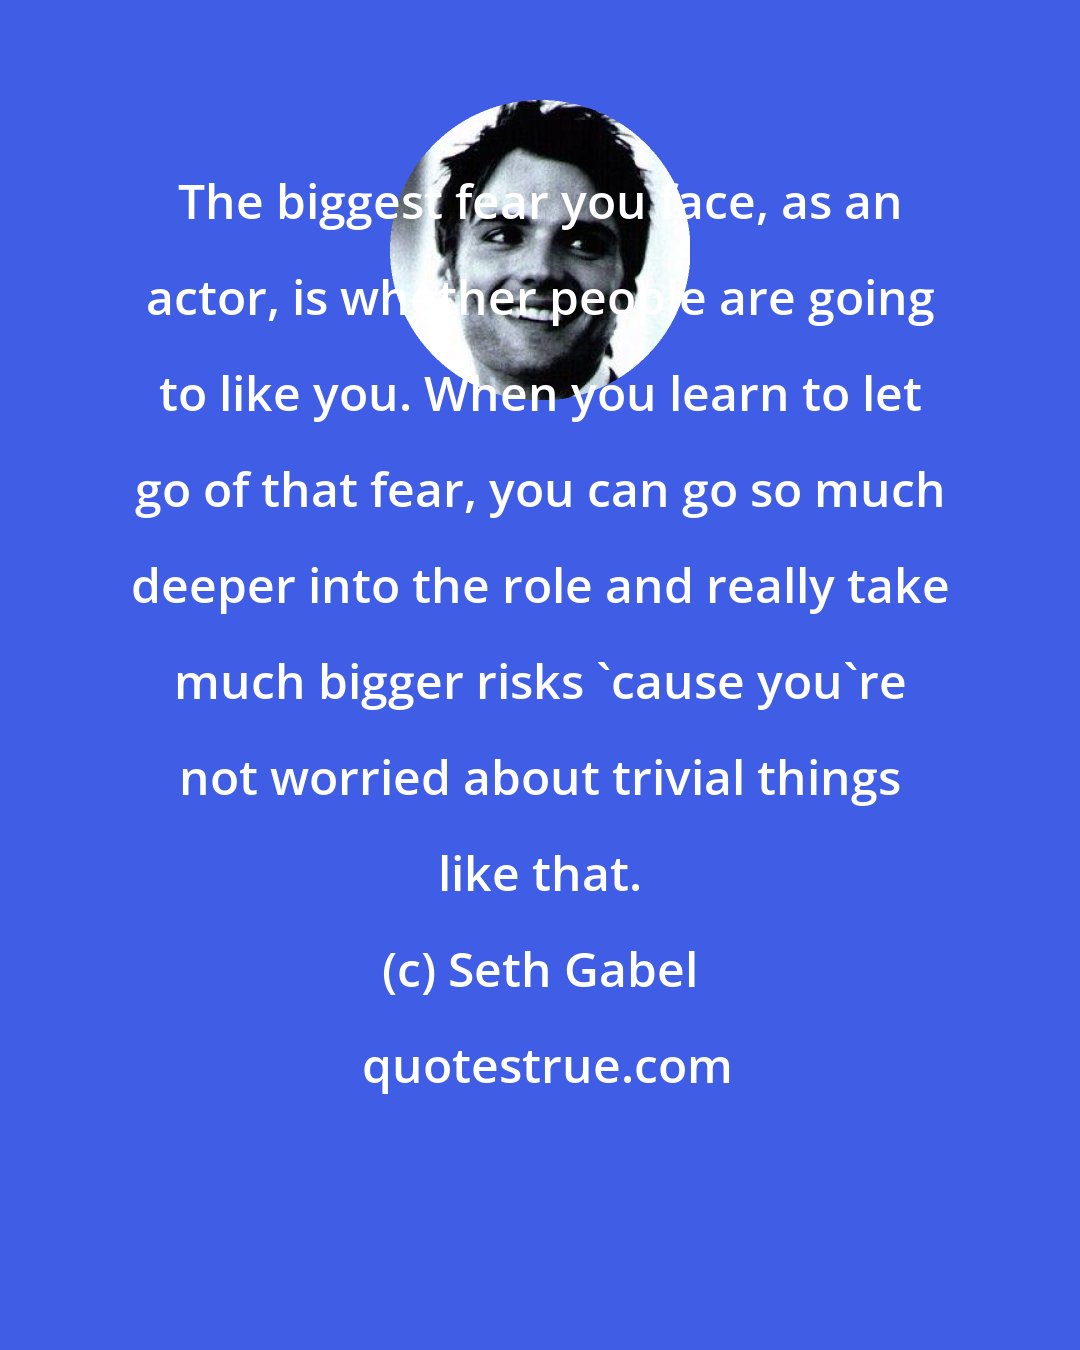 Seth Gabel: The biggest fear you face, as an actor, is whether people are going to like you. When you learn to let go of that fear, you can go so much deeper into the role and really take much bigger risks 'cause you're not worried about trivial things like that.